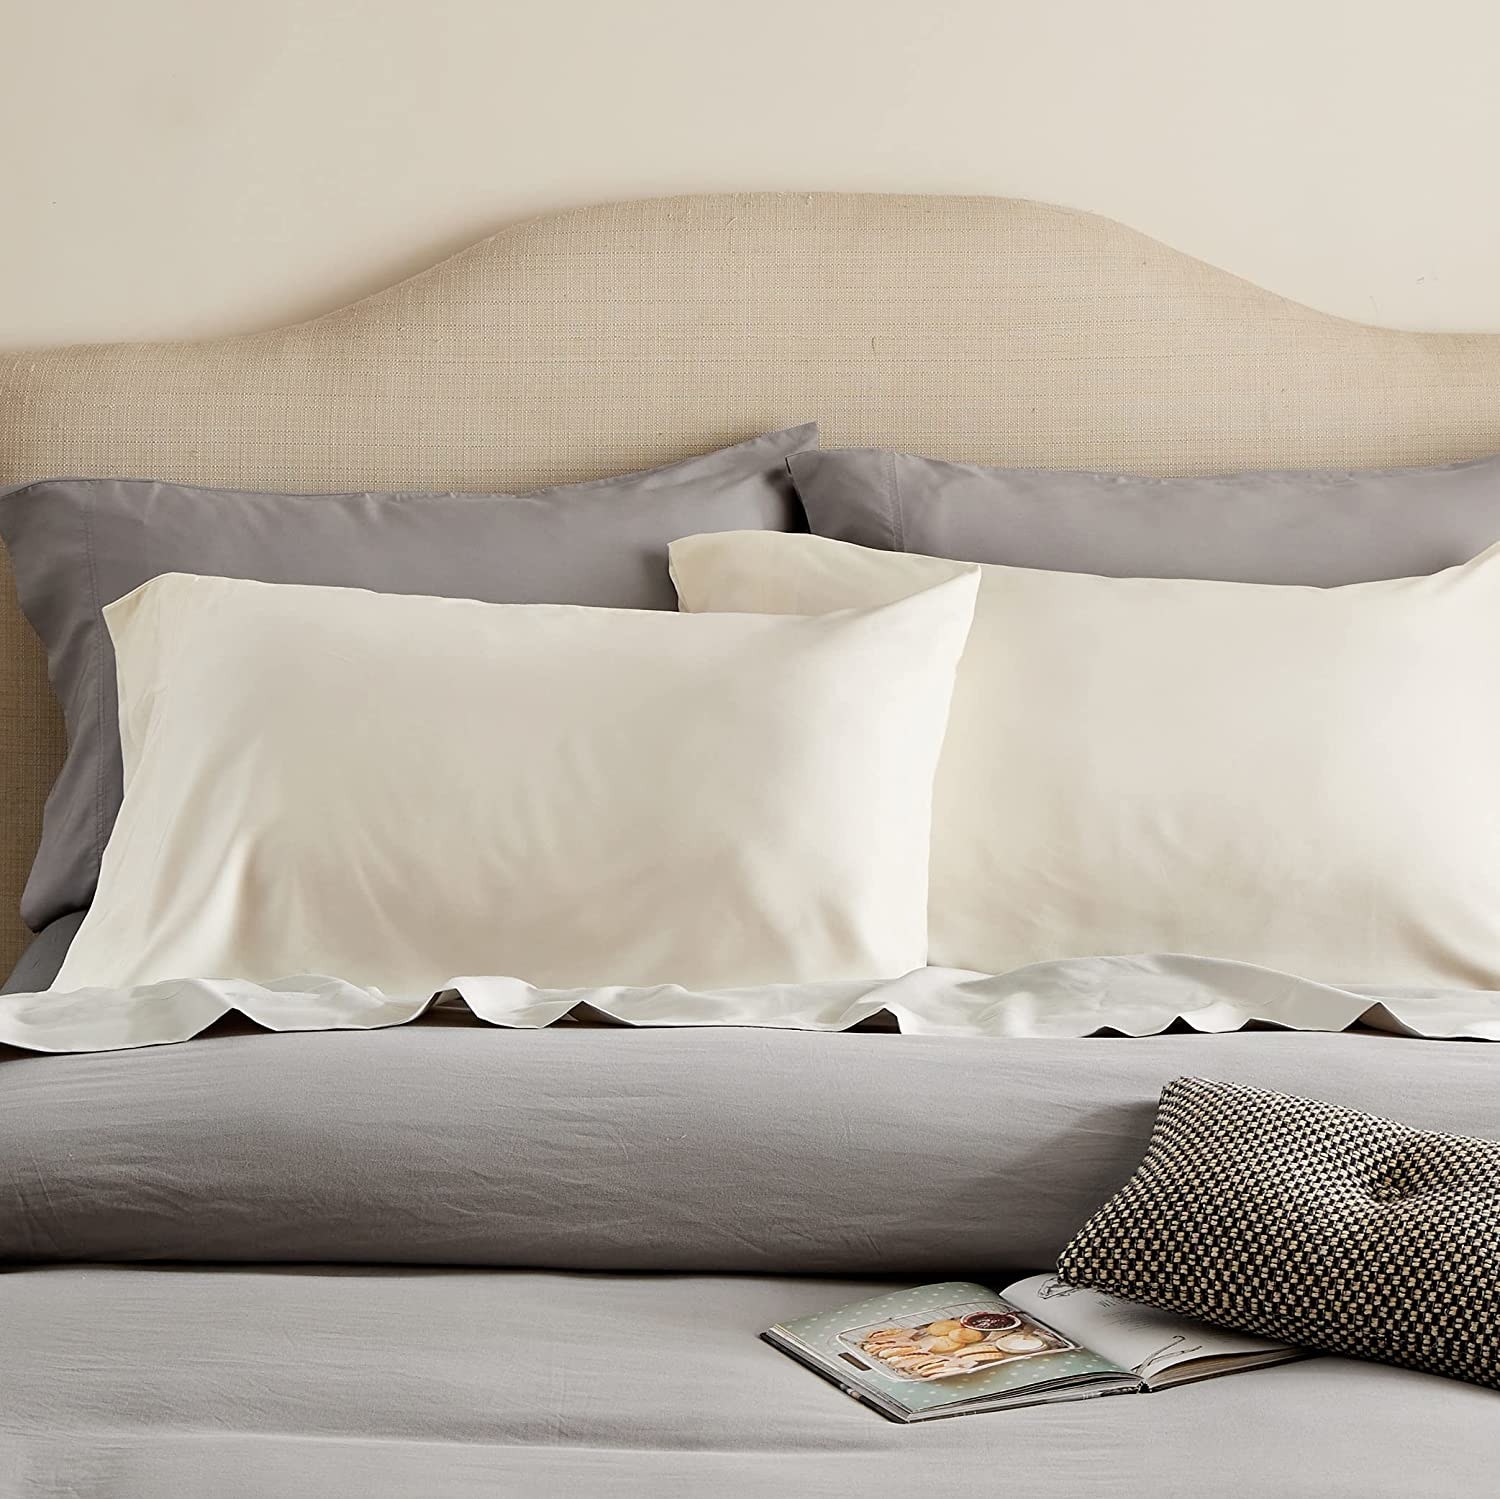 A set of pillows with the bamboo pillowcases on a bed